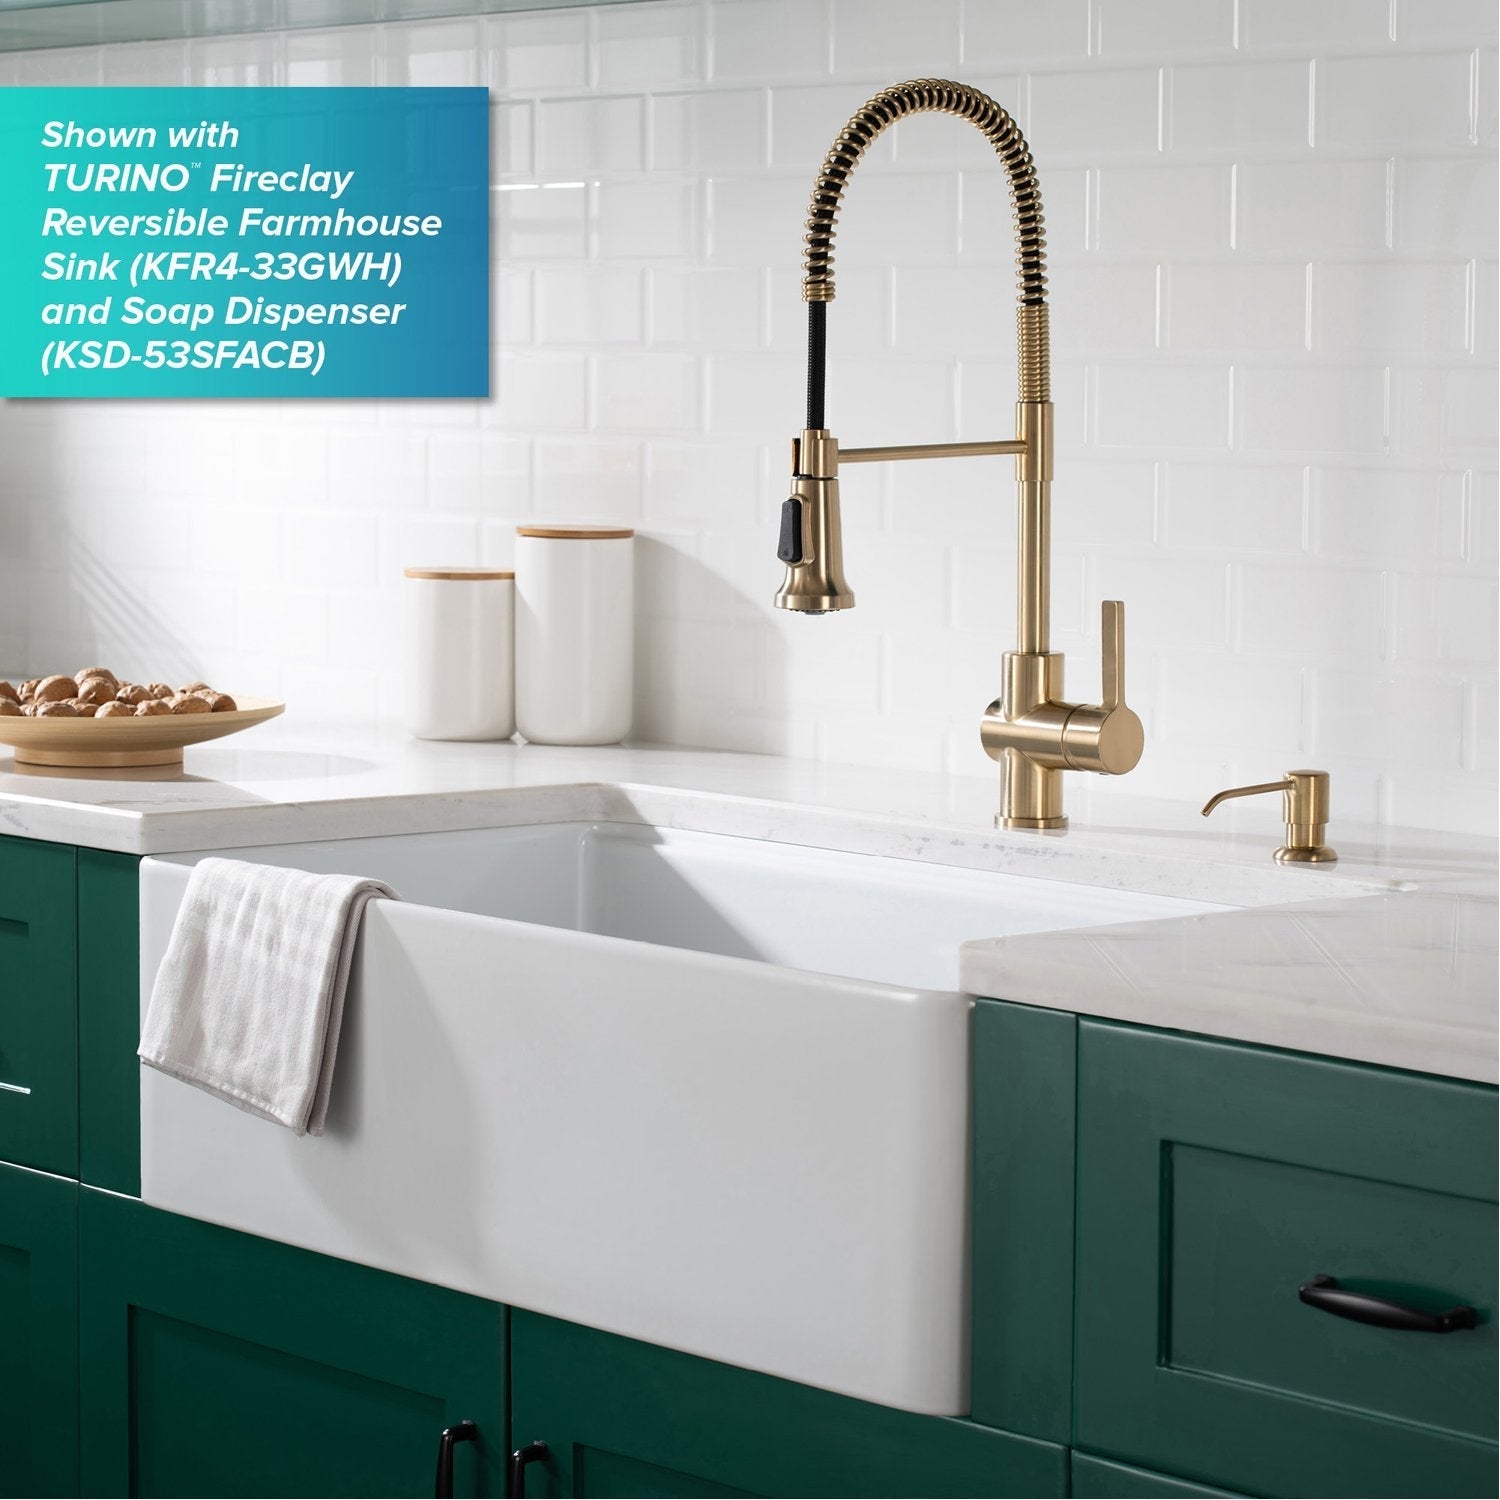 KRAUS Britt Commercial Style Pull-Down Single Handle Kitchen Faucet in Spot Free Antique Champagne Bronze KPF-1691SFACB | DirectSinks